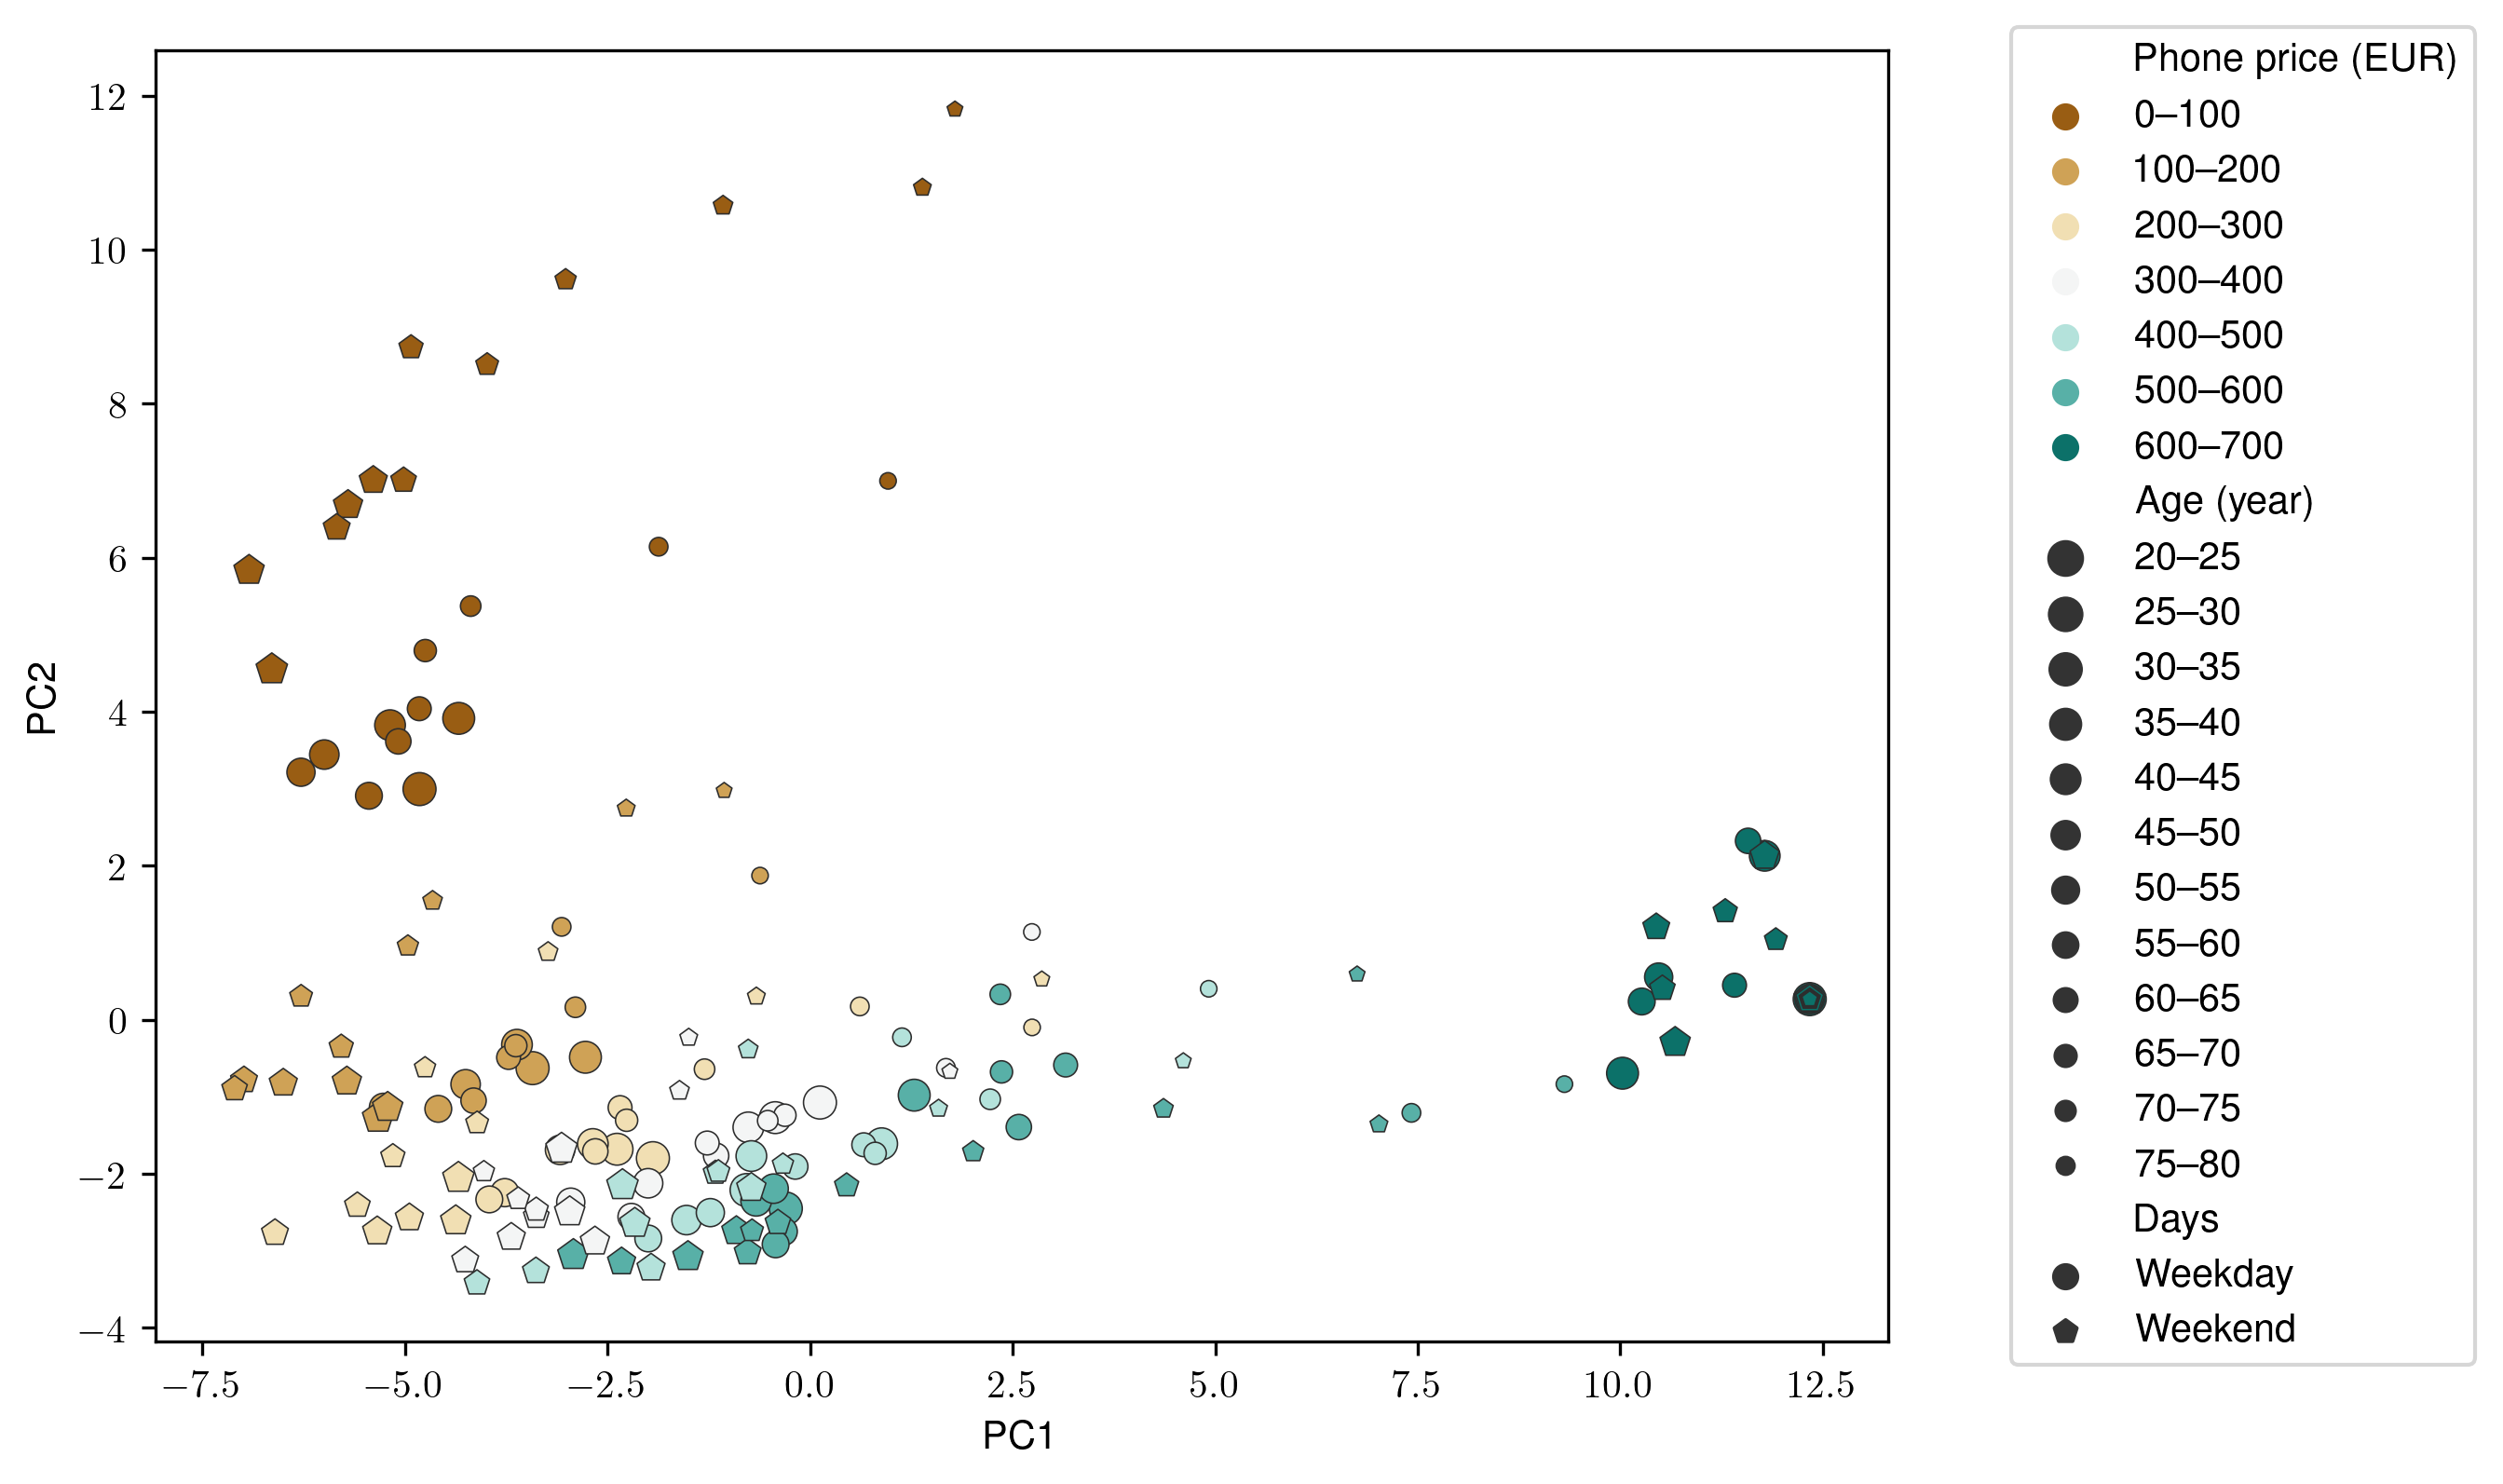 Scatter plot of the 2-component Principal Component Analysis. Marker size indicates subscriber age category,     the color represents the phone price category and the workdays and holidays are distinguished by the marker type.